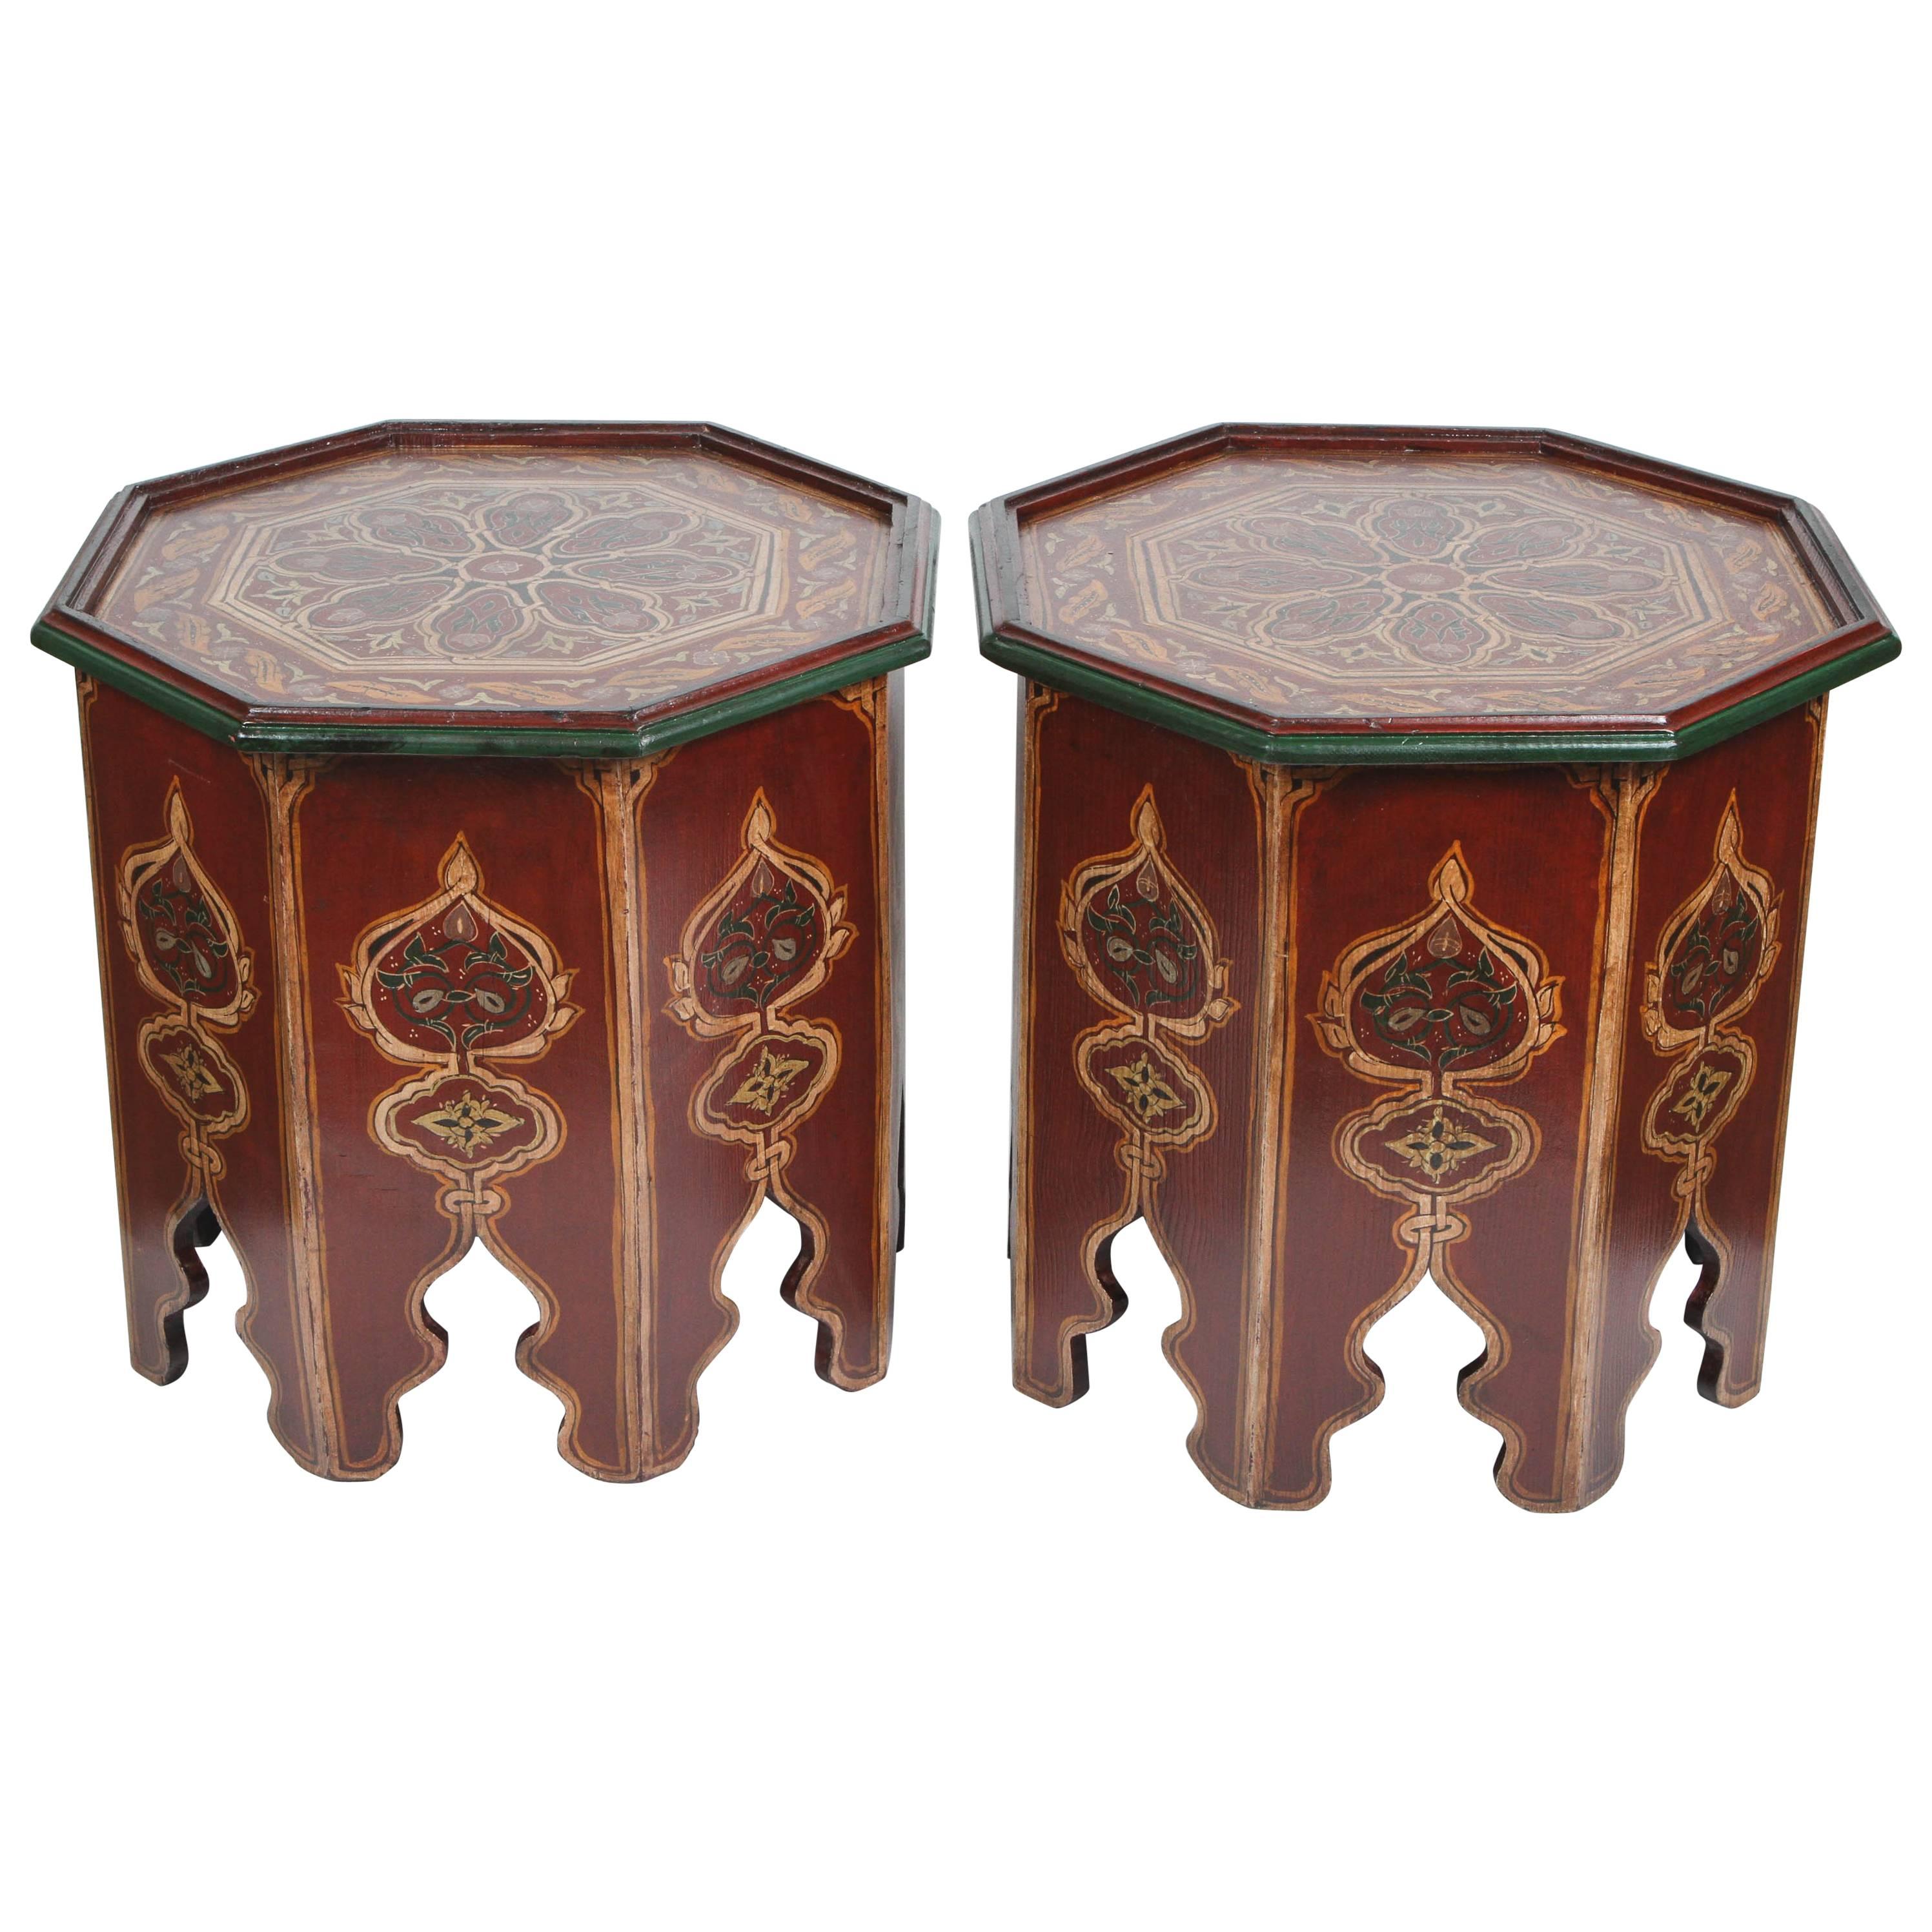 Moroccan Side Tables with Moorish Designs, Pair